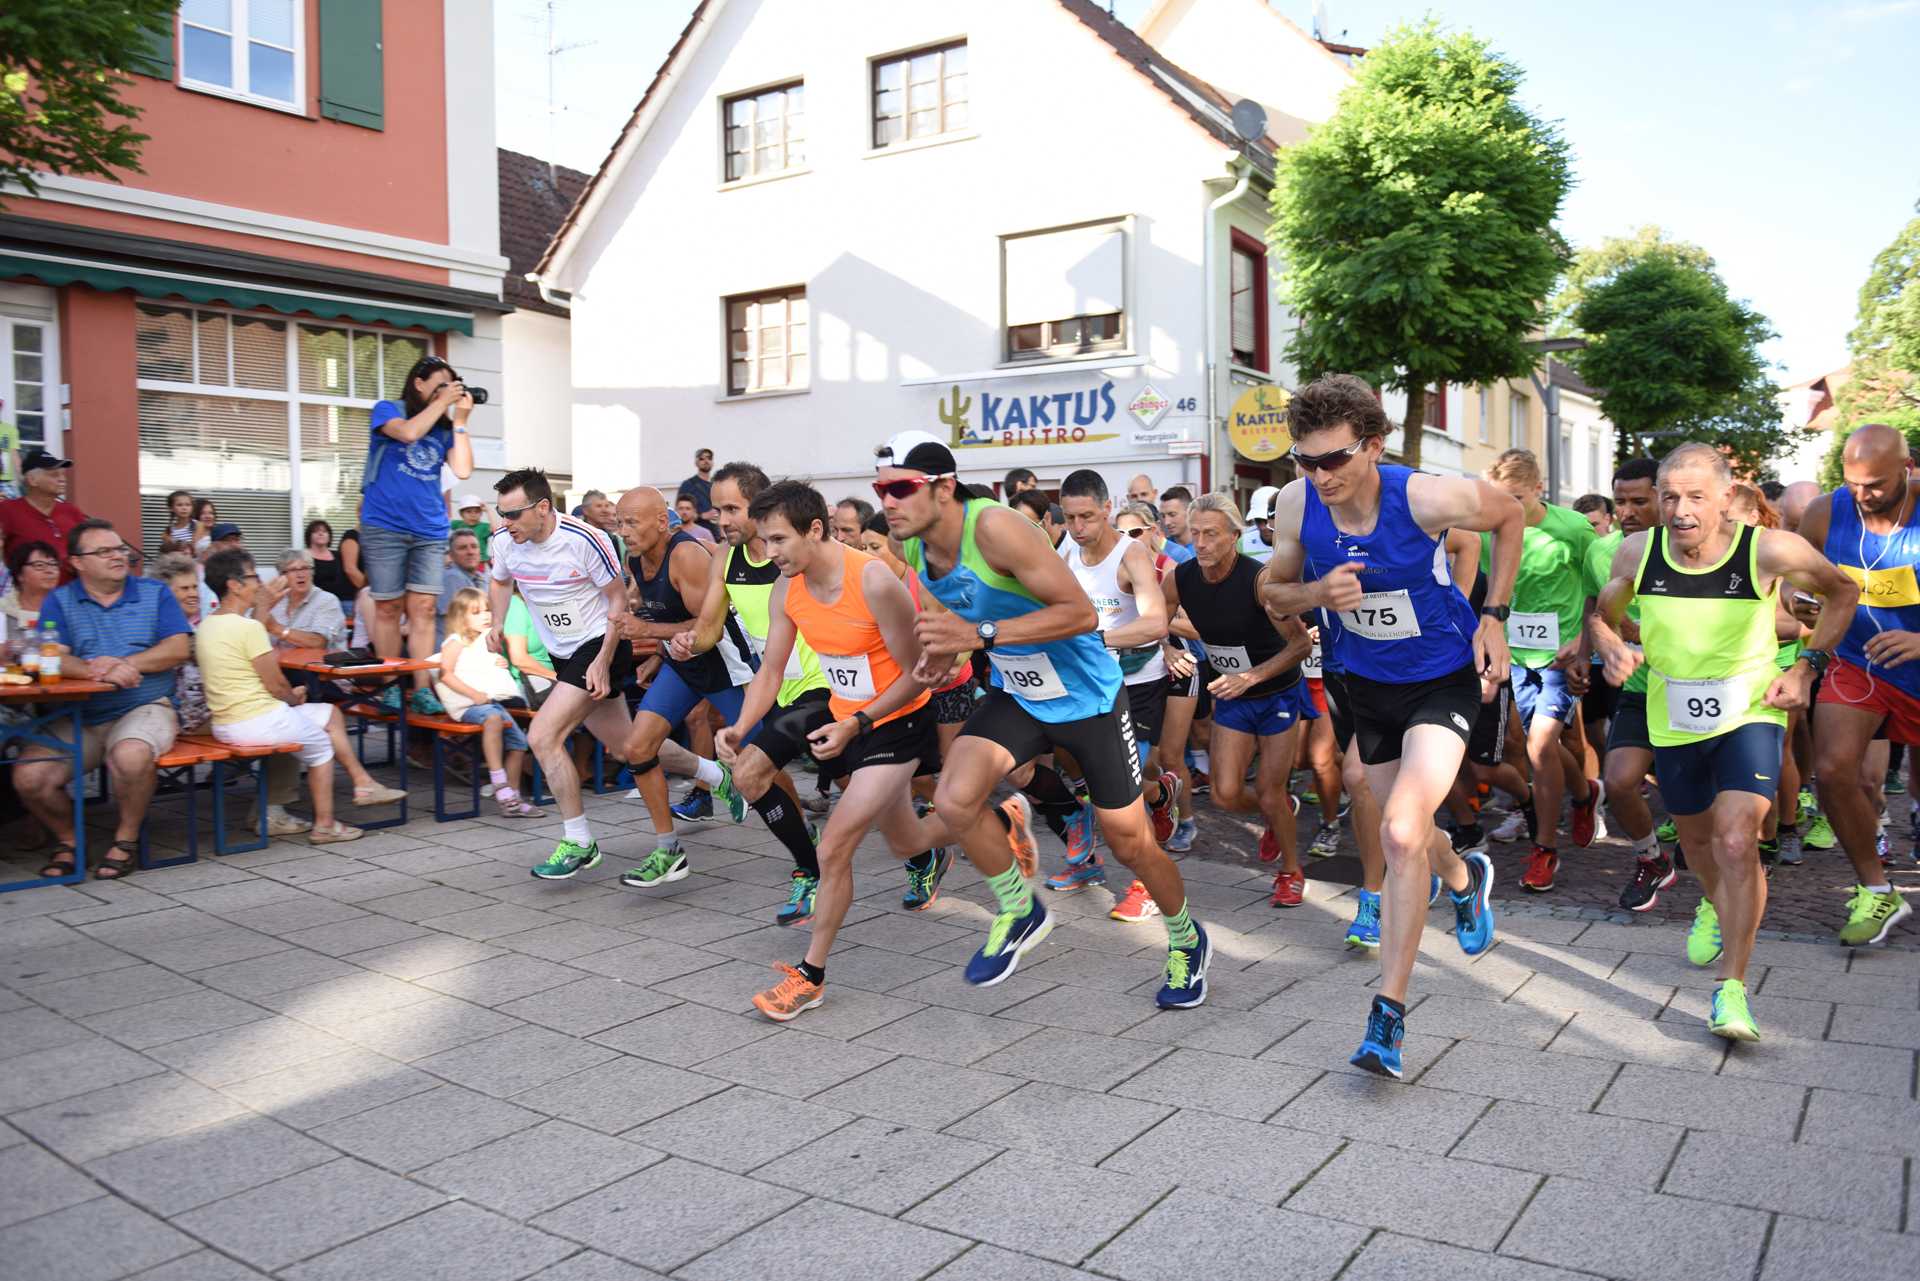 Strong Run in Aulendorf